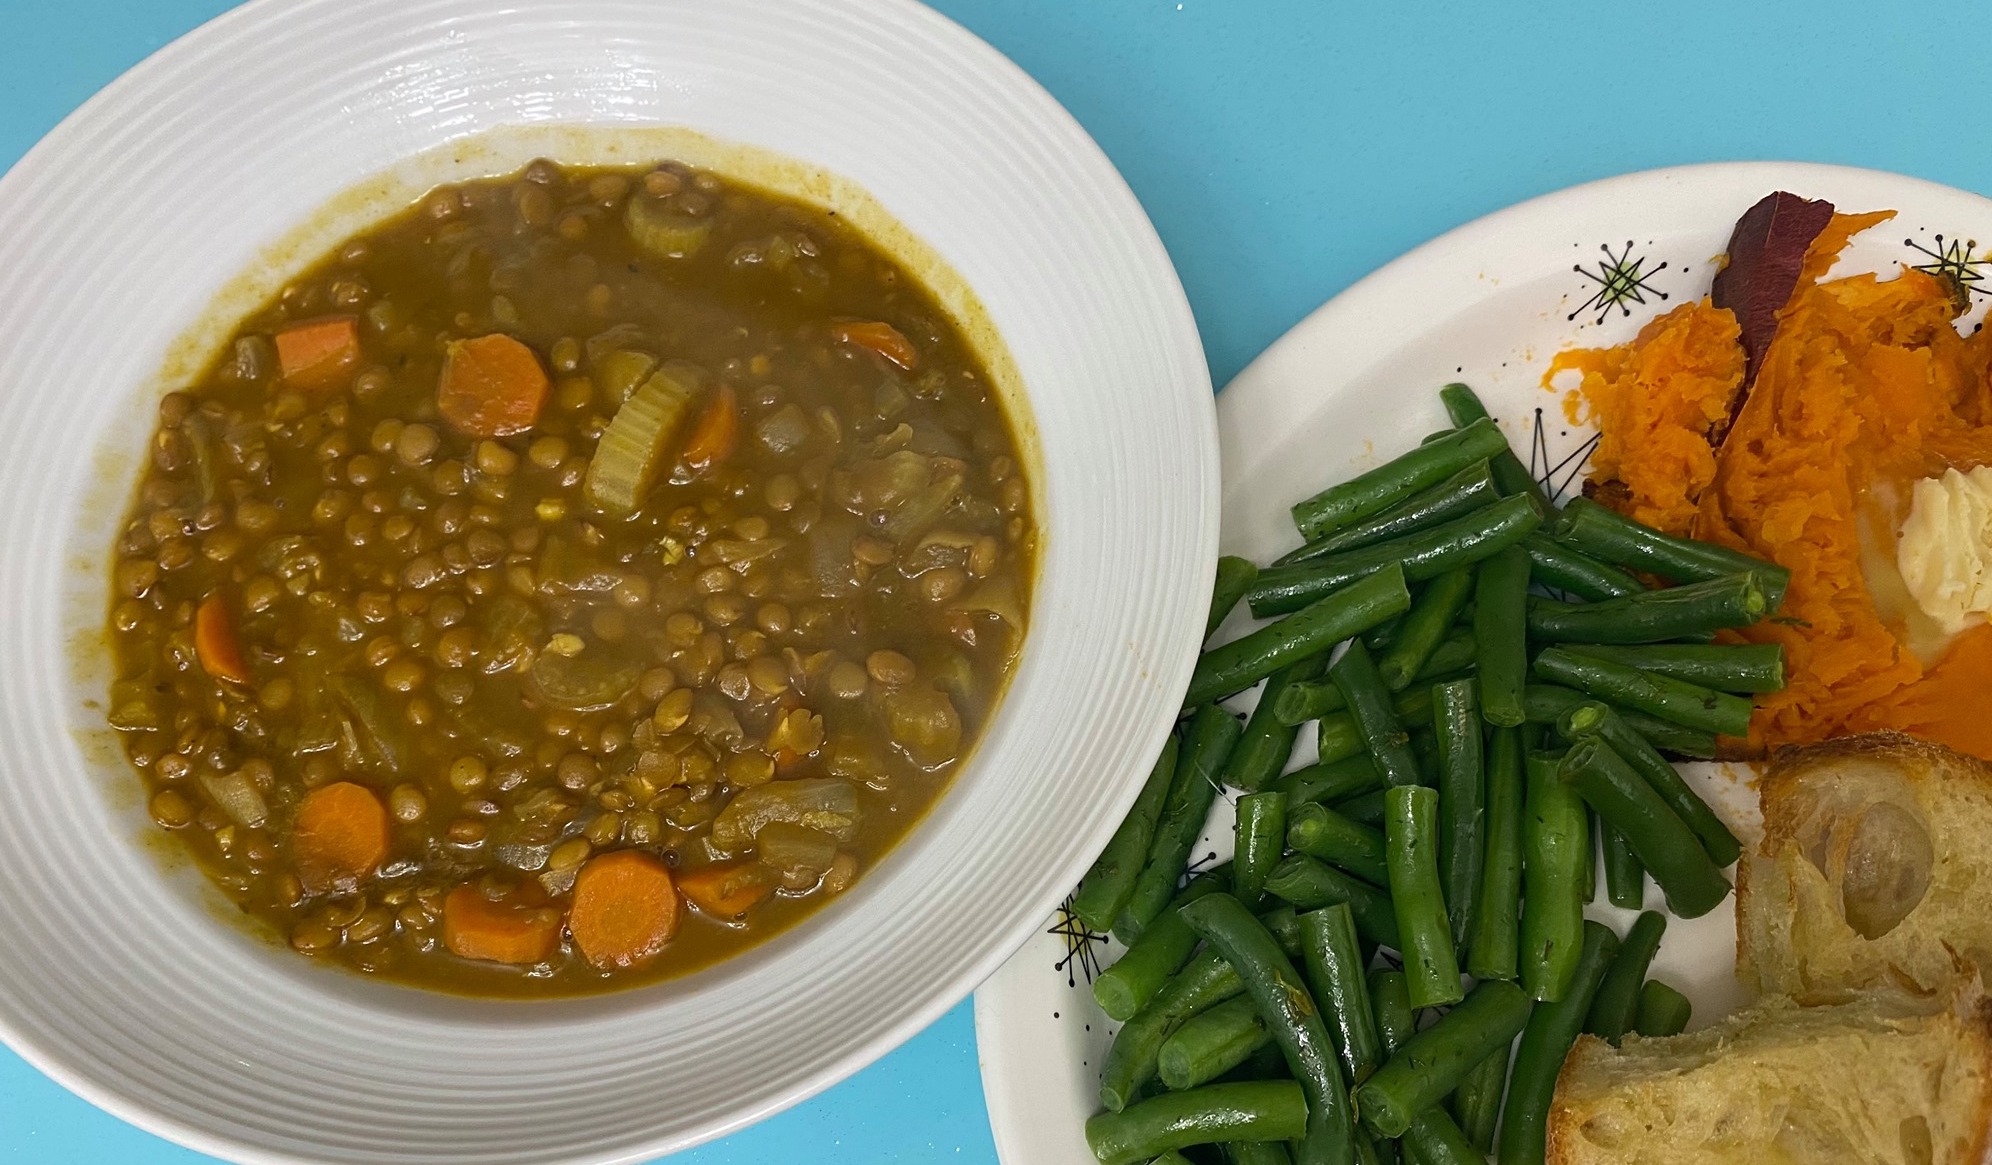 Pumpkin Curry Lentil soup in bowl with side of green beans, yams, and bread